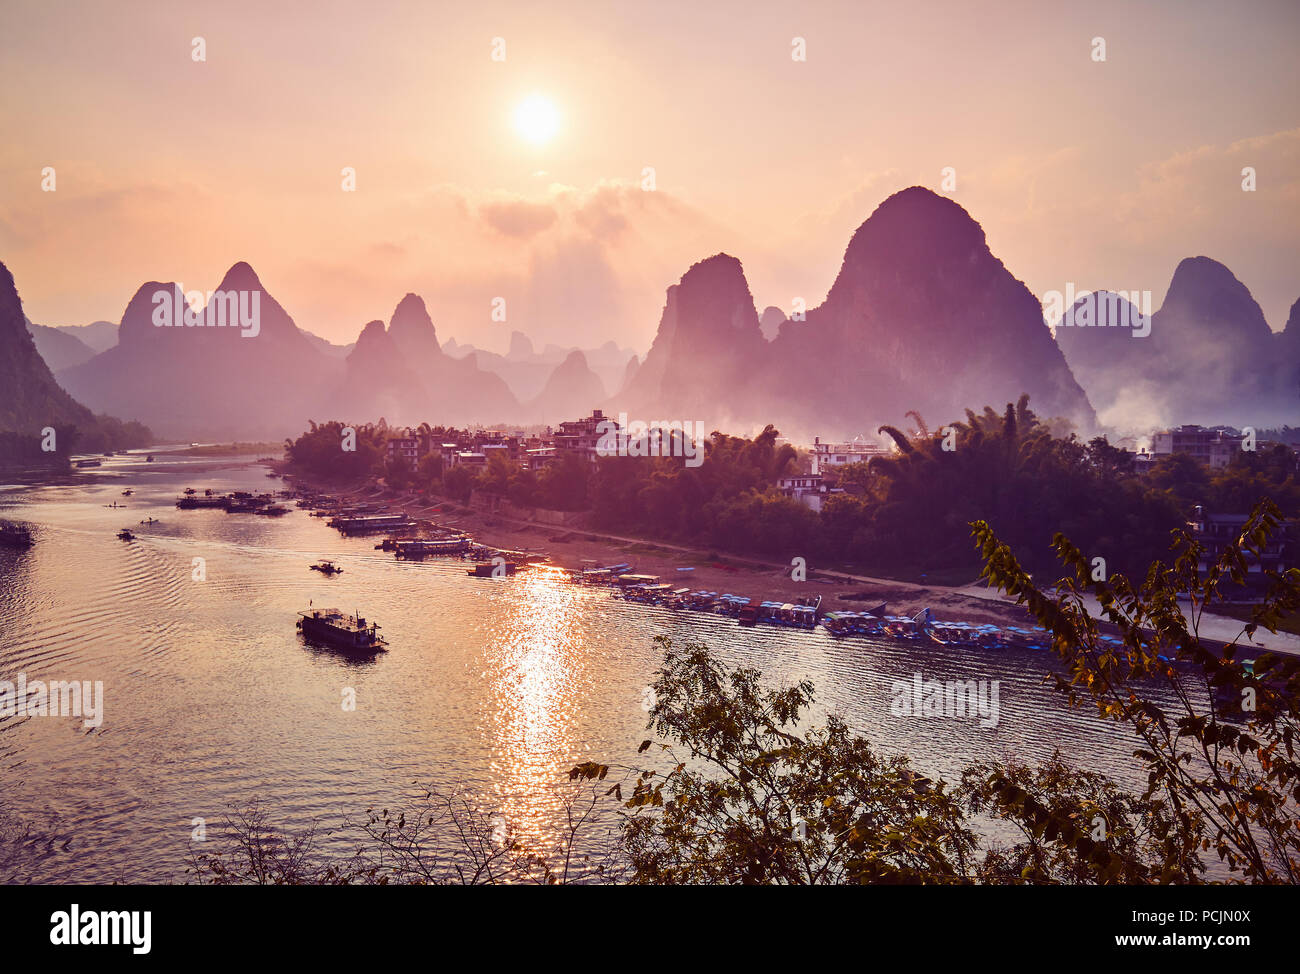 Scenic sunset over Li River in Xingping, color toning applied, China. Stock Photo